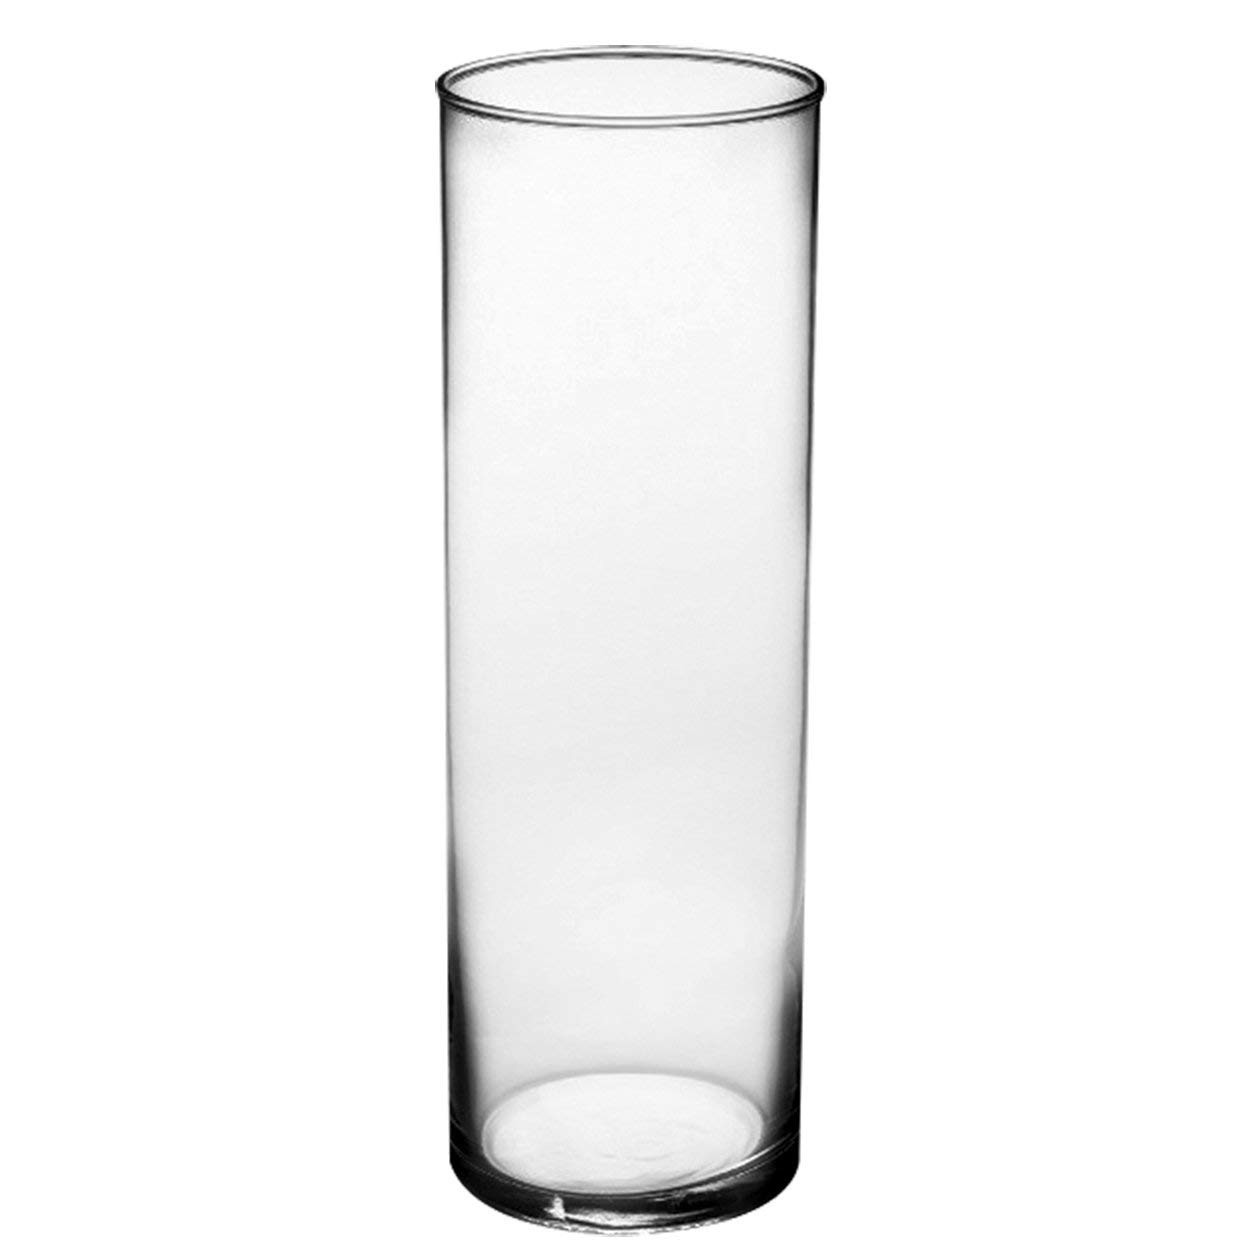 large clear glass vases cheap of amazon com syndicate sales 3 1 2 x 10 1 2 cylinder vase clear within amazon com syndicate sales 3 1 2 x 10 1 2 cylinder vase clear planters garden outdoor